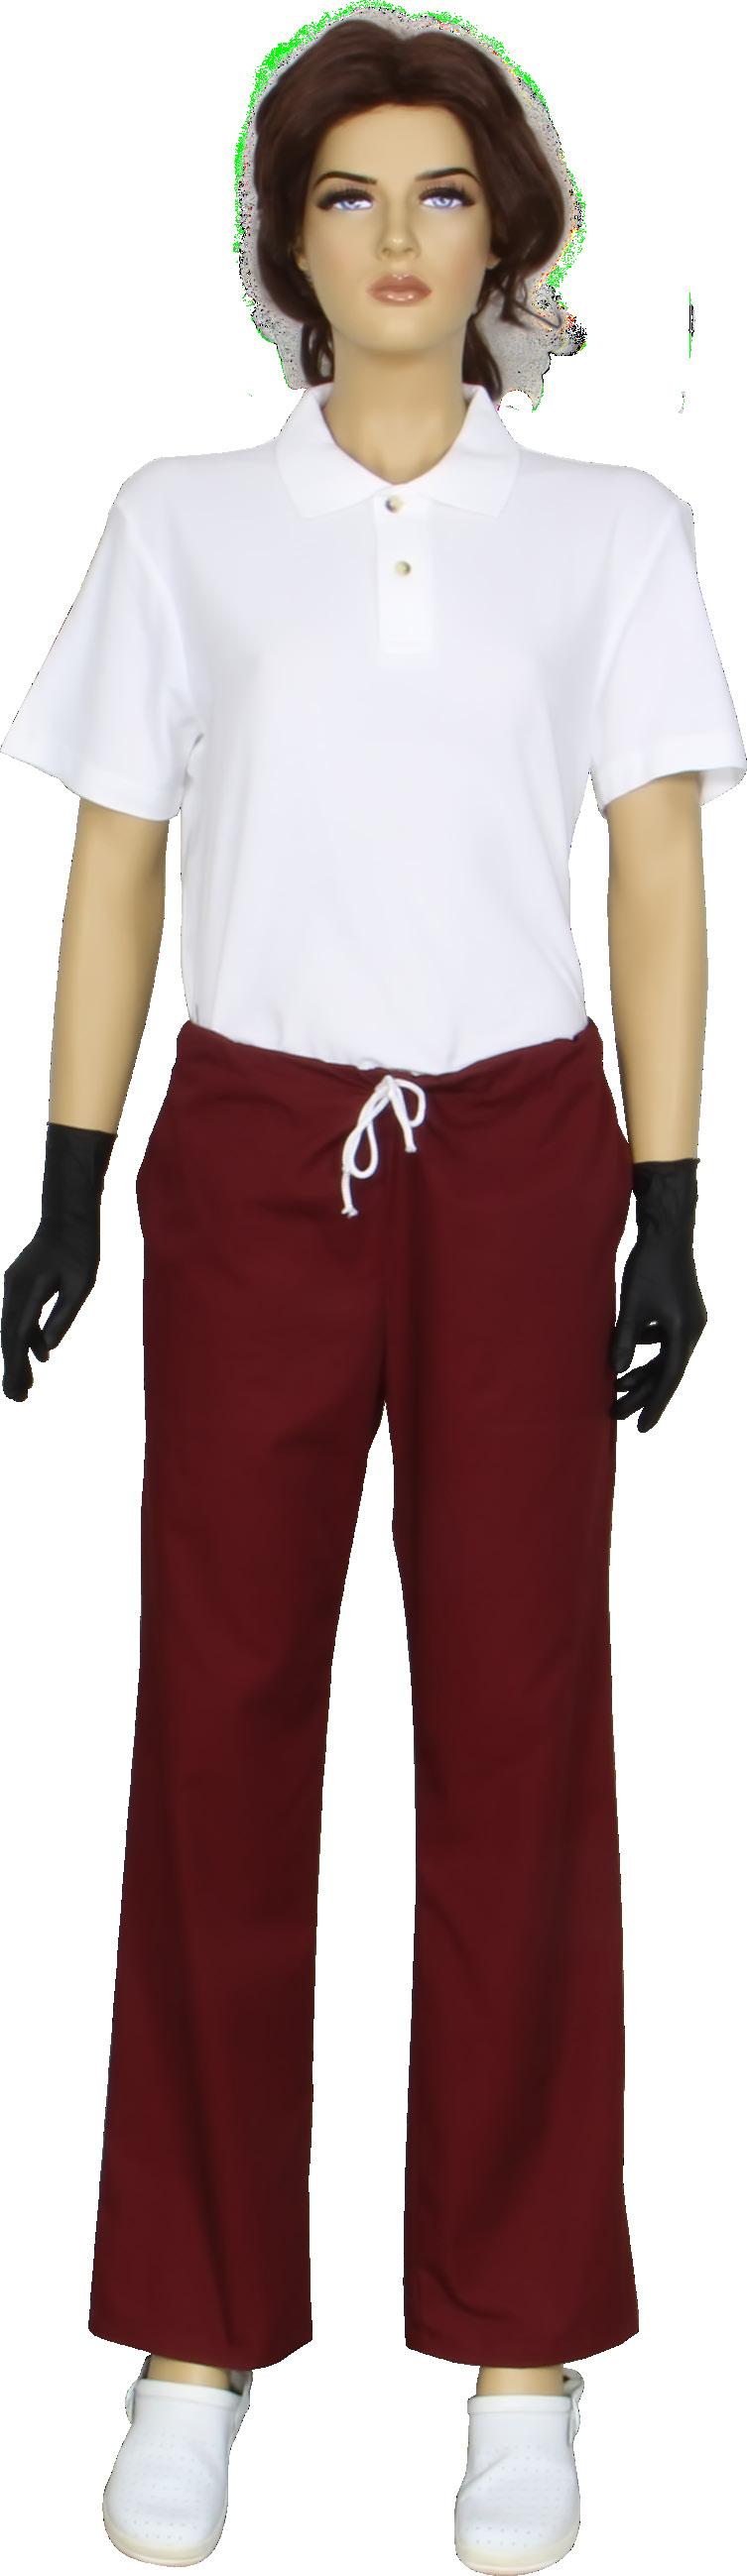 Women s trousers, Modern Women s trousers, with a modern design. They feature a fabric waist band at the front, an elastic back and a cord on the front side which can be adjusted for perfect fit.